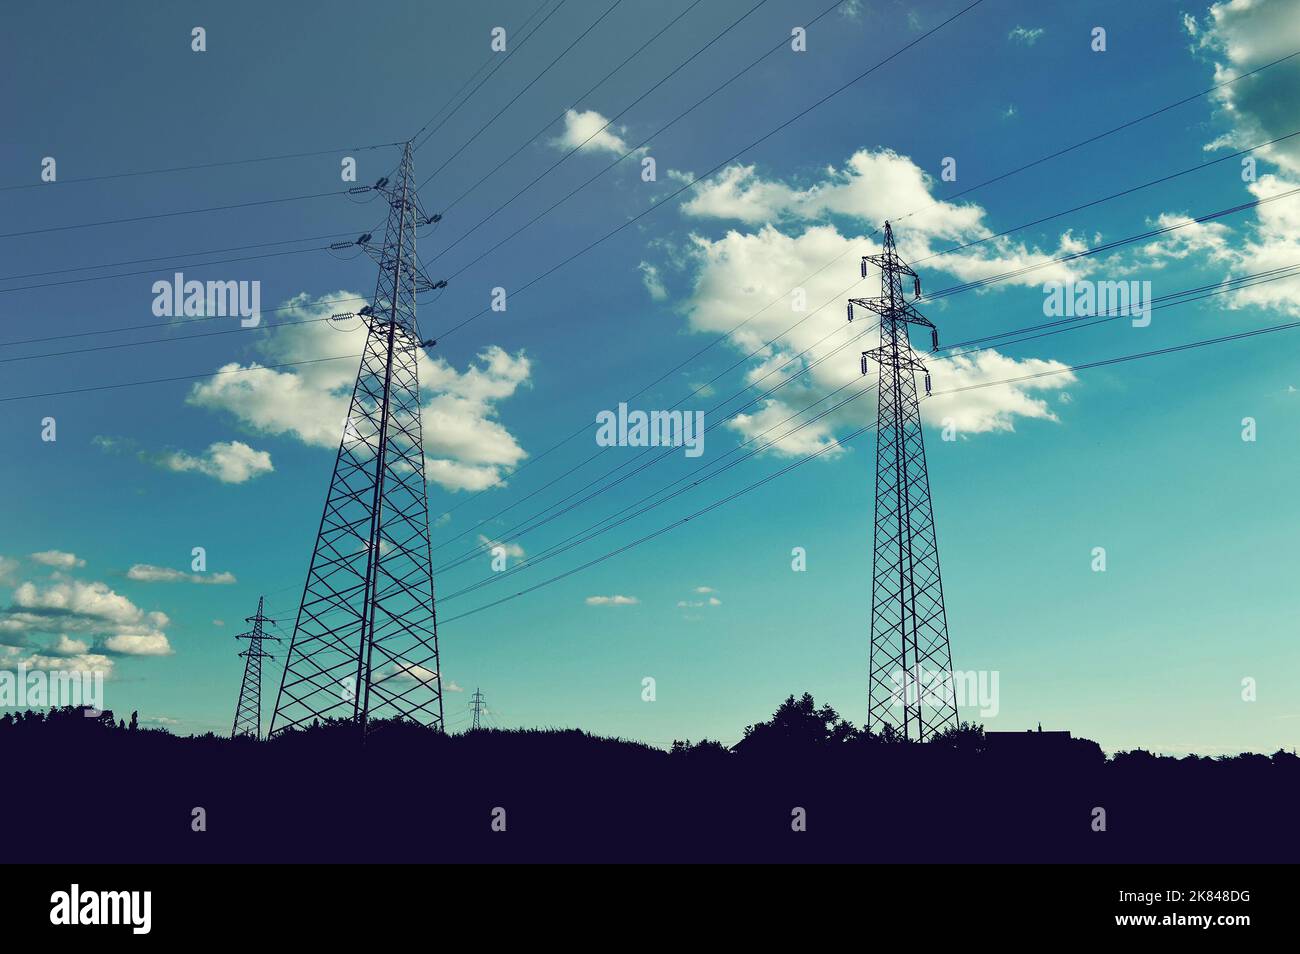 Transmission towers carrying high voltage electric power lines. Silhouettes of electricity pylons in the field Stock Photo